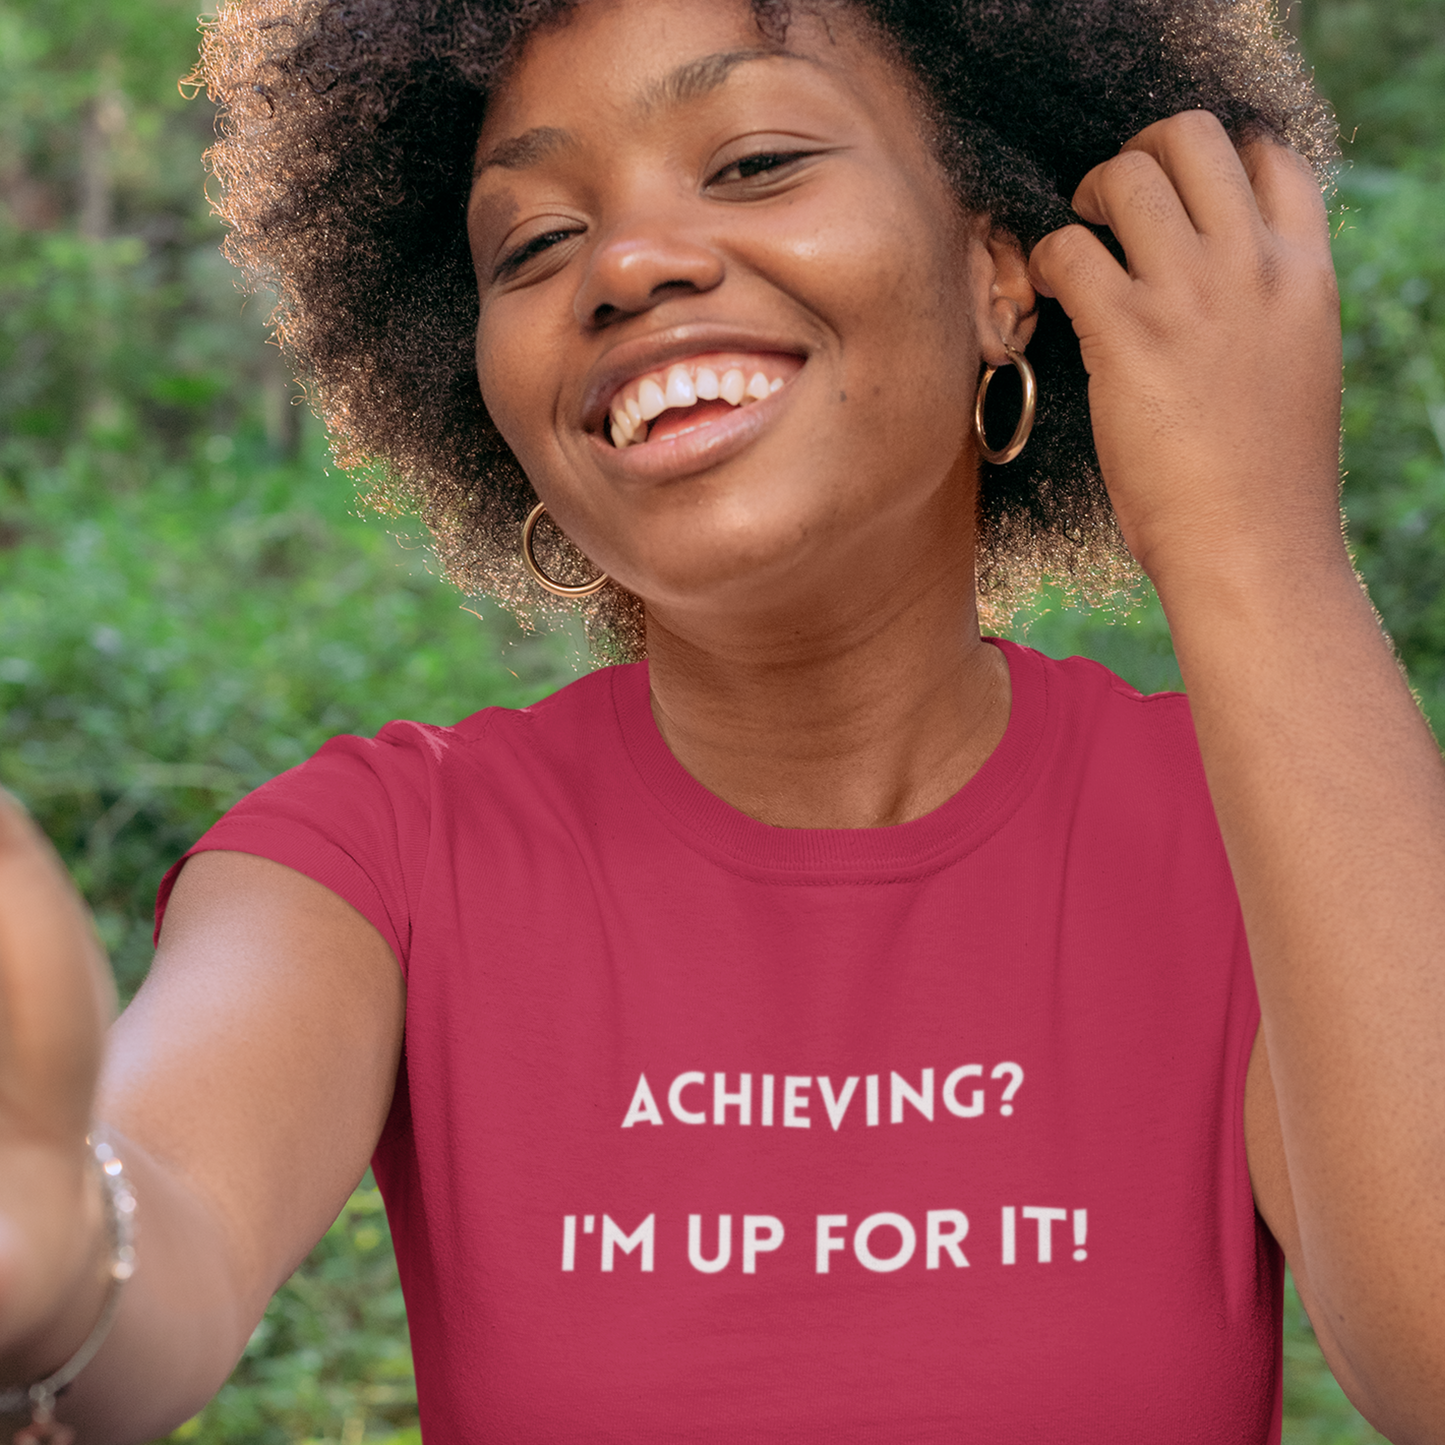 Achieving? I am up for it! t shirt t shirt with inspirational words t shirt gift for students self affirming words t shirt